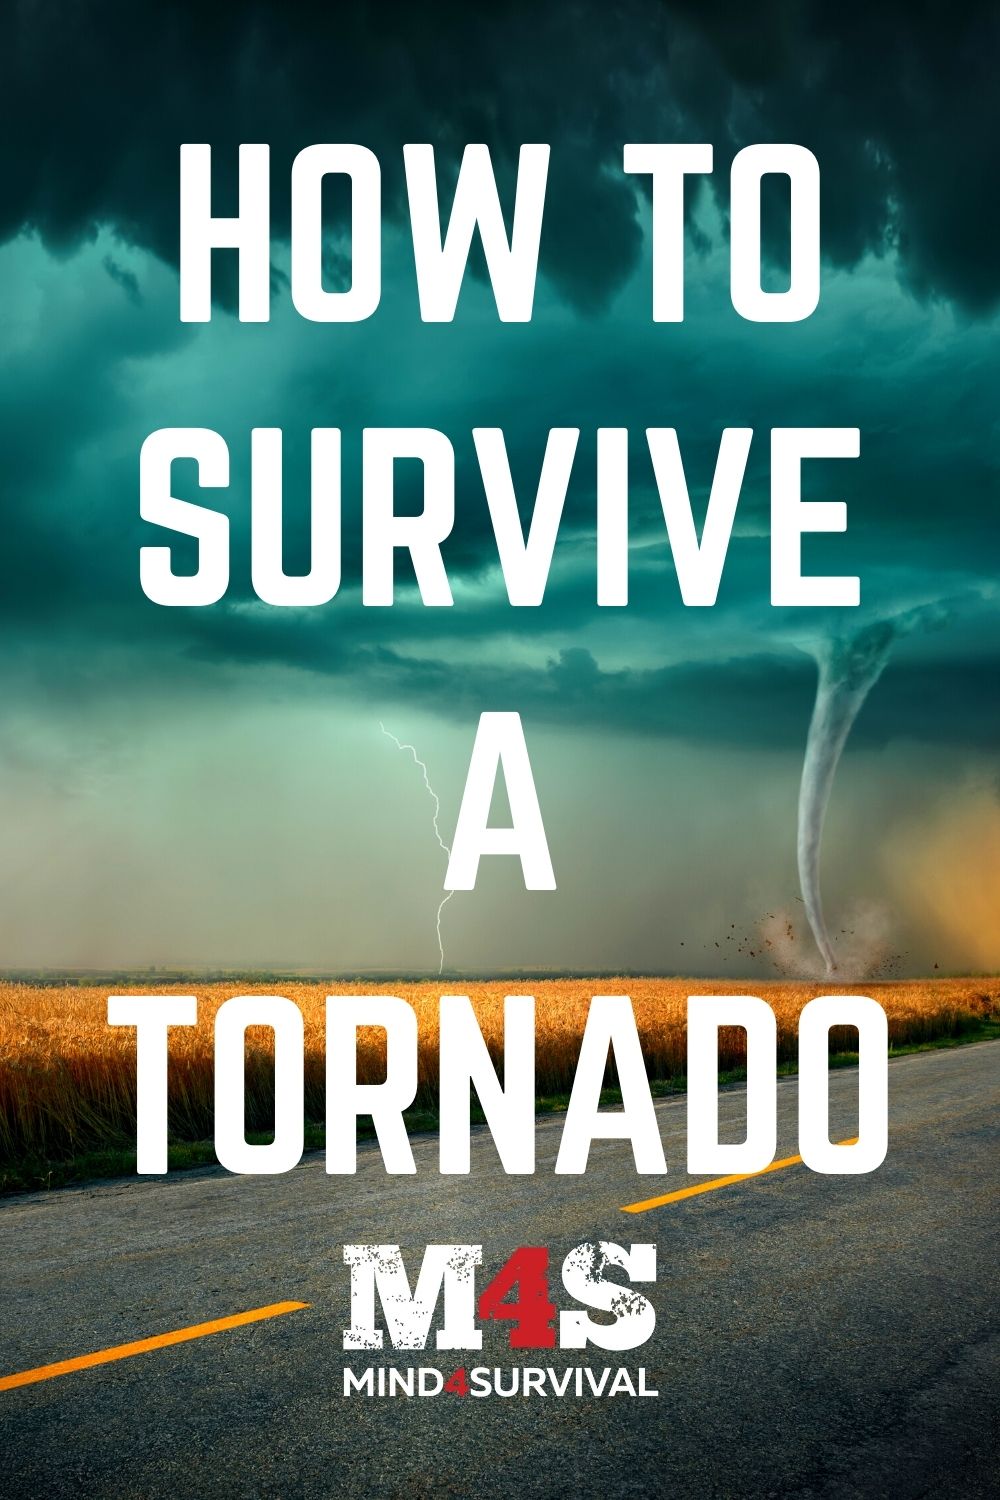 How to Survive a Tornado: 6 Tips to Keep Your Family Safe